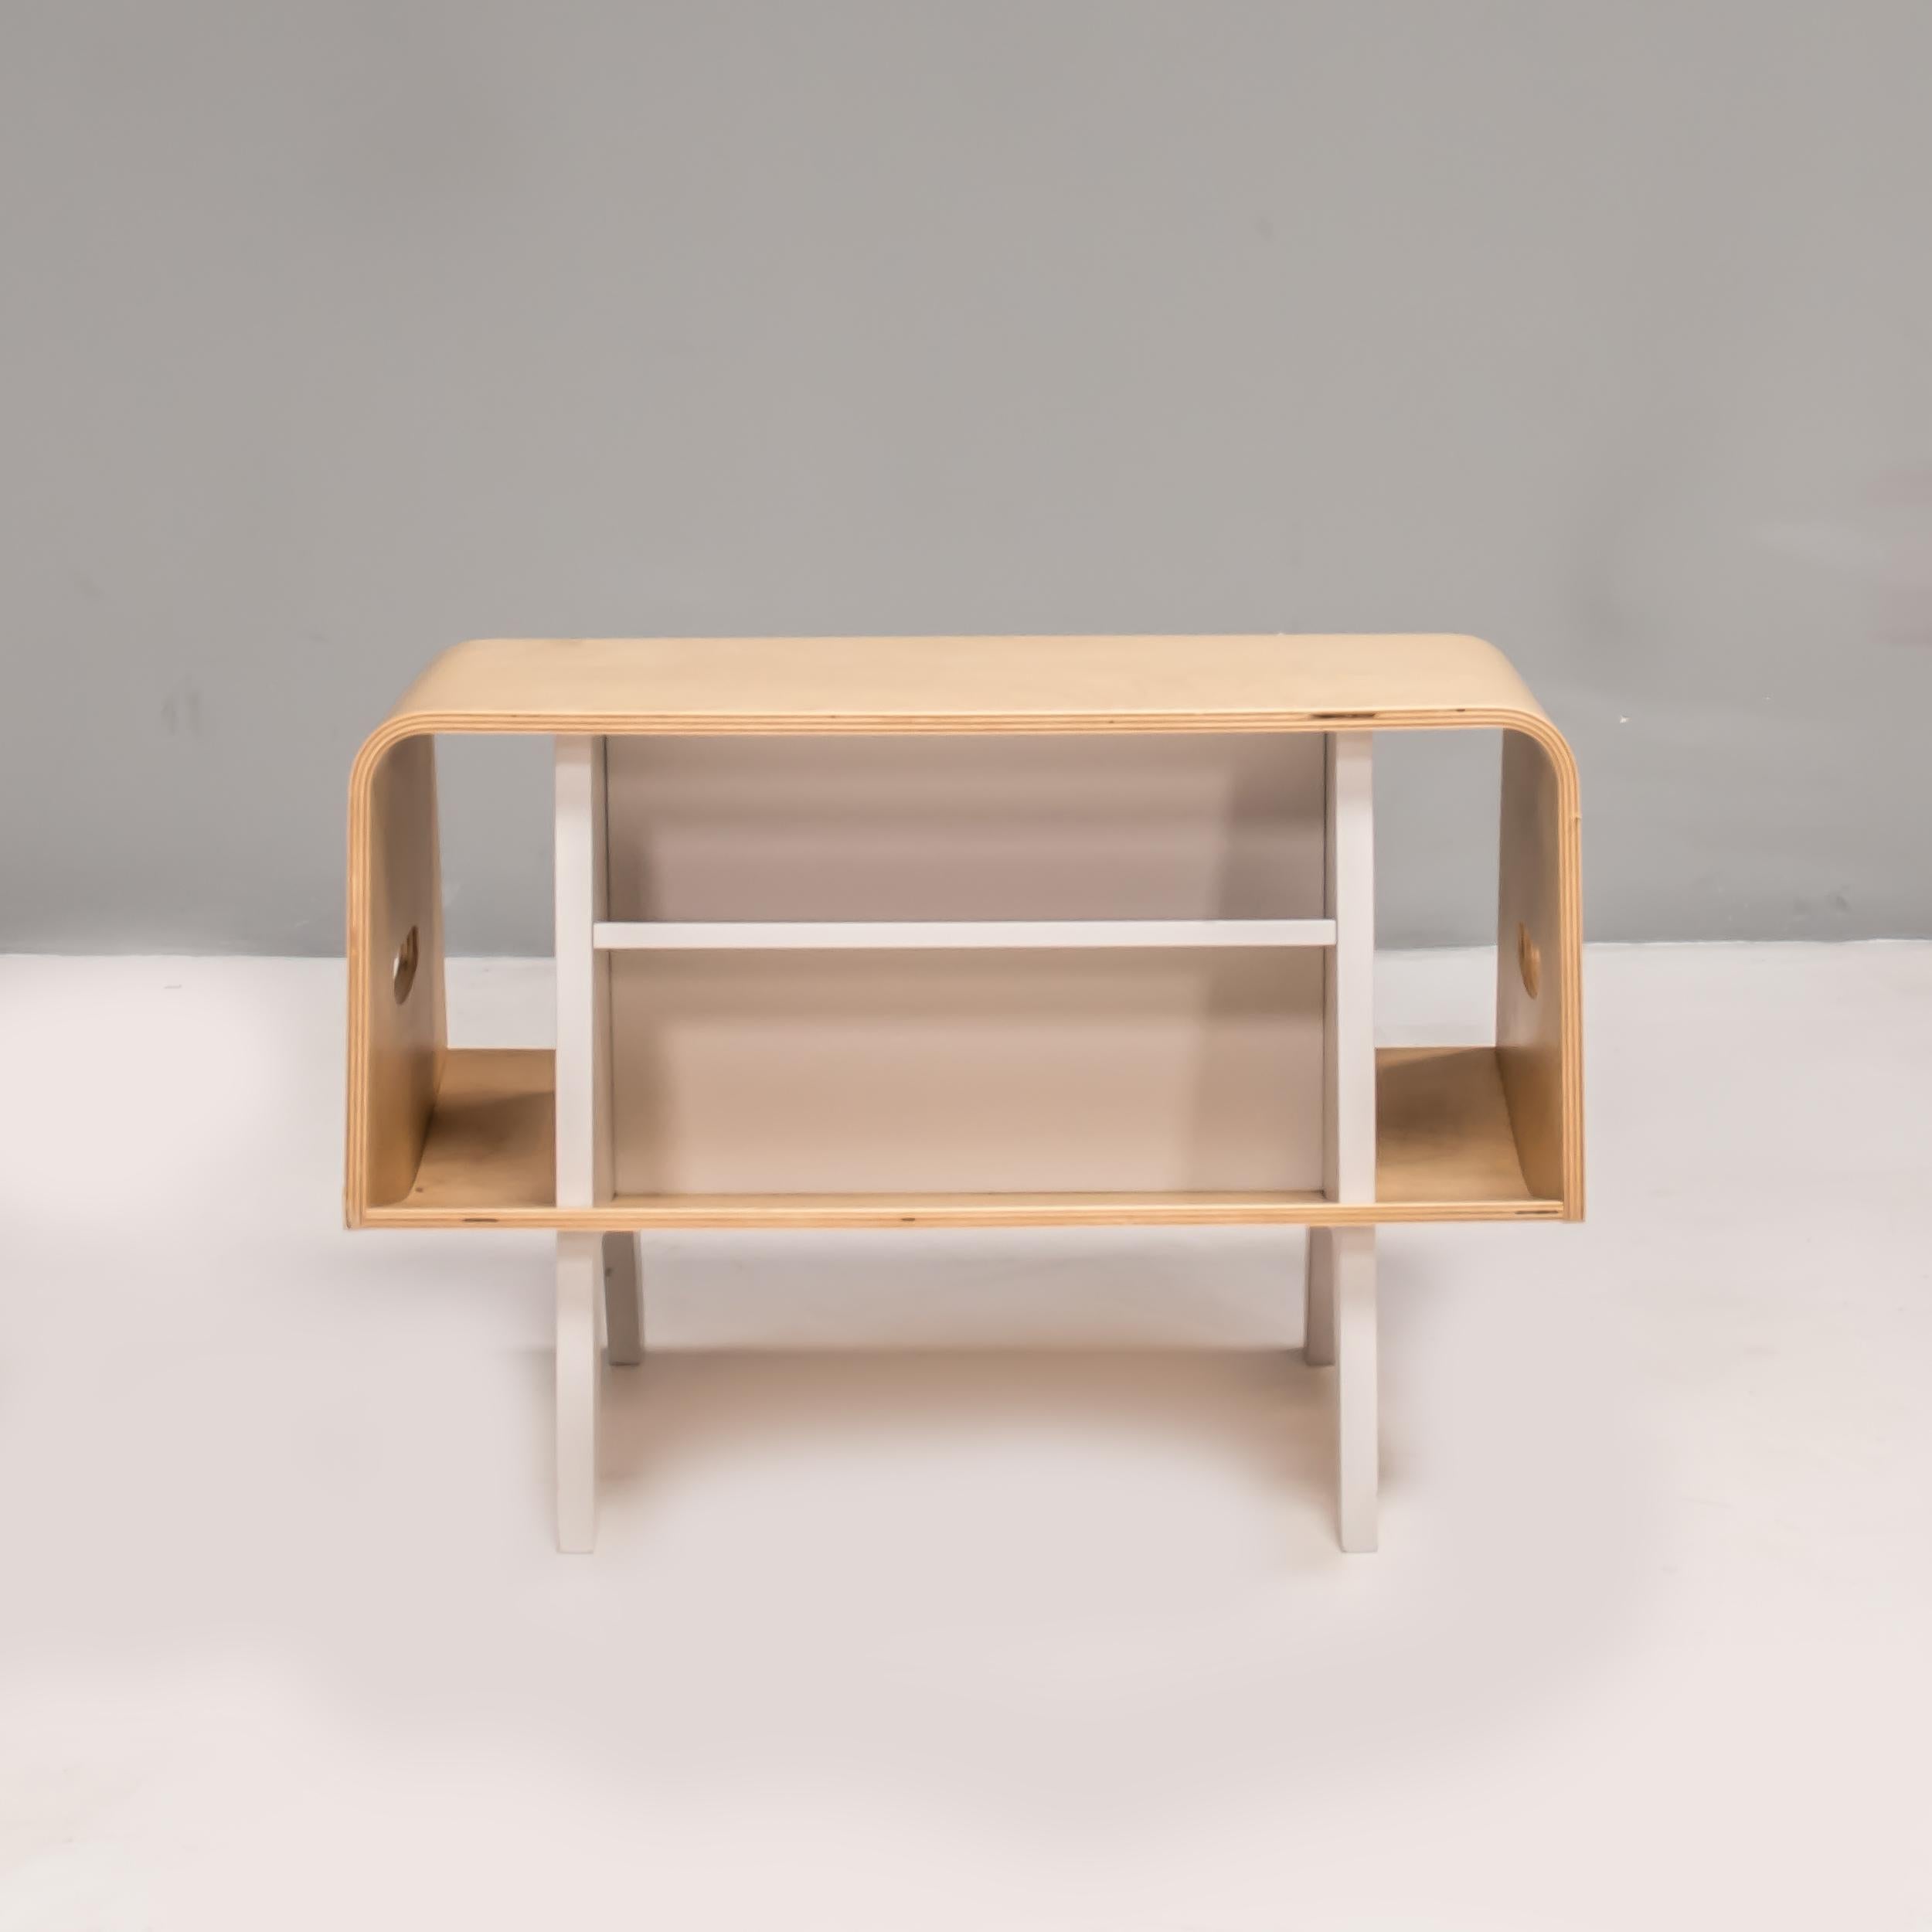 Designed in 2003, the Donkey Mark 3 is a reimagining of the original Penguin Donkey. Isokon Plus invited Shin and Tomoko Azumi to create a new version of the iconic storage unit by Egon Riss and Ernest Race.

Constructed from birch plywood, the